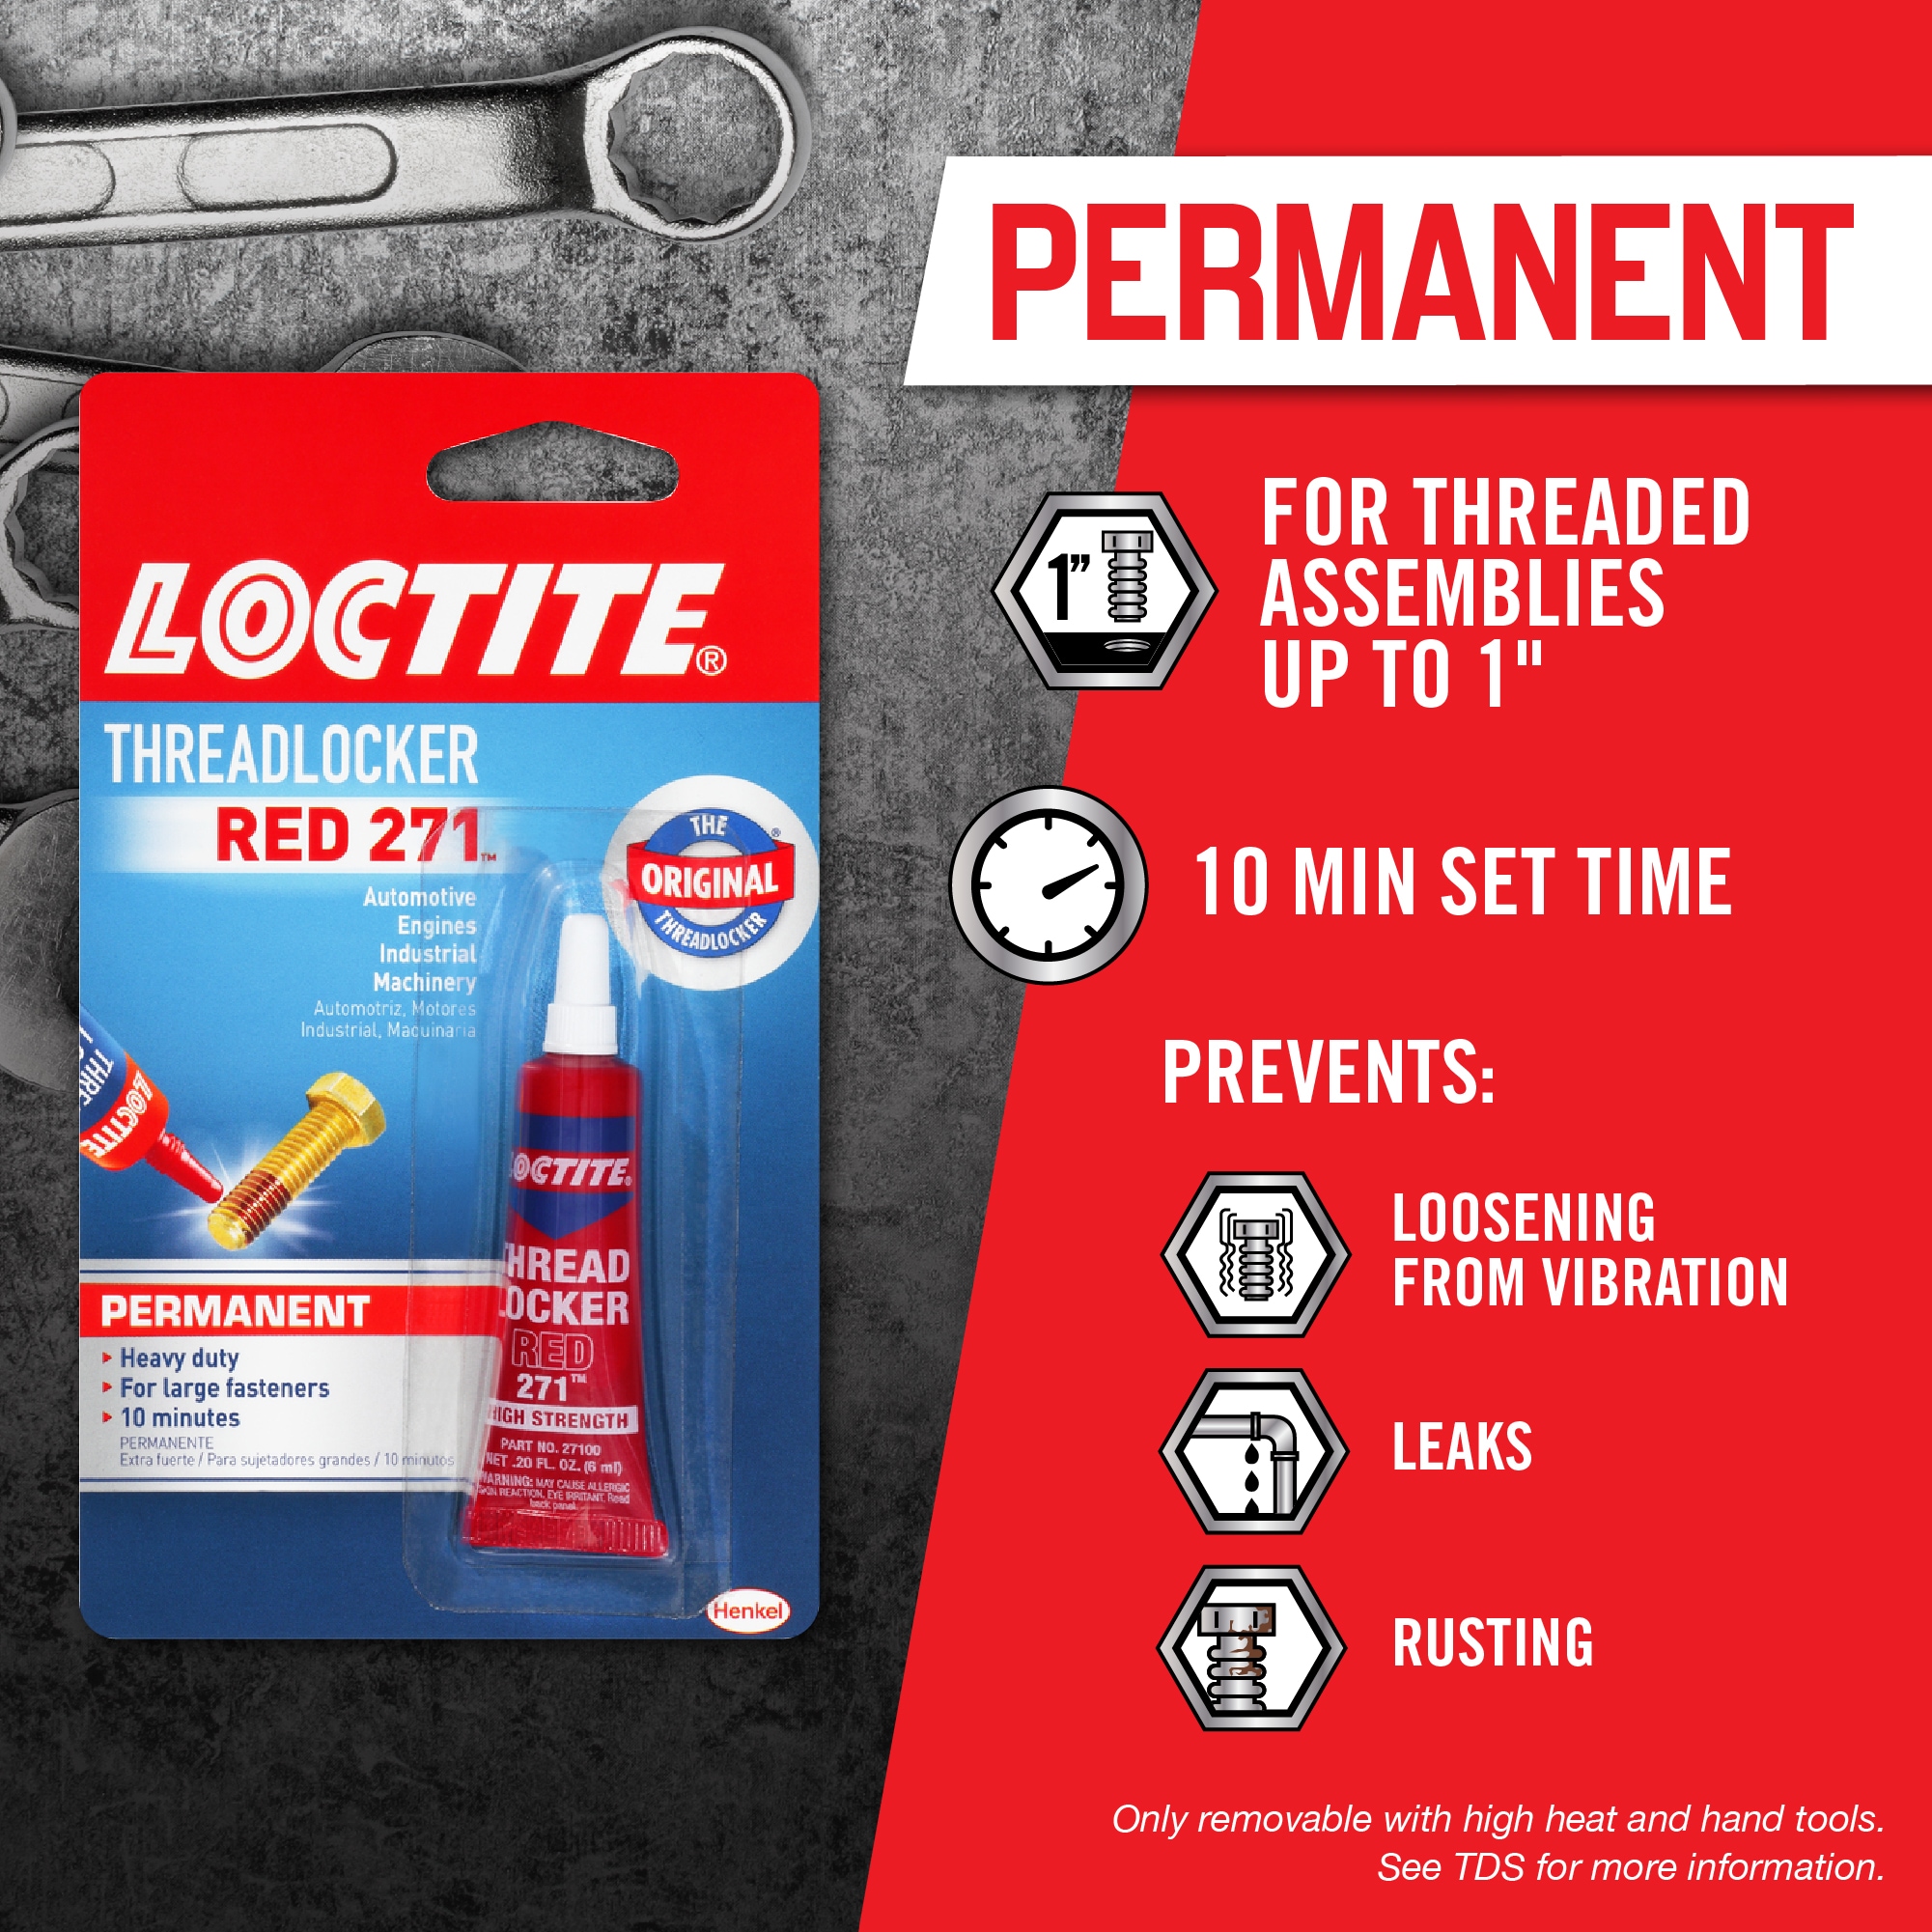 Loctite Shoe Glue, Strong & Flexible Fabric Glue, Resistant to Water,  Impact, & Vibrations, Dries Clear - 0.6 fl oz Bottle, 1 Pack